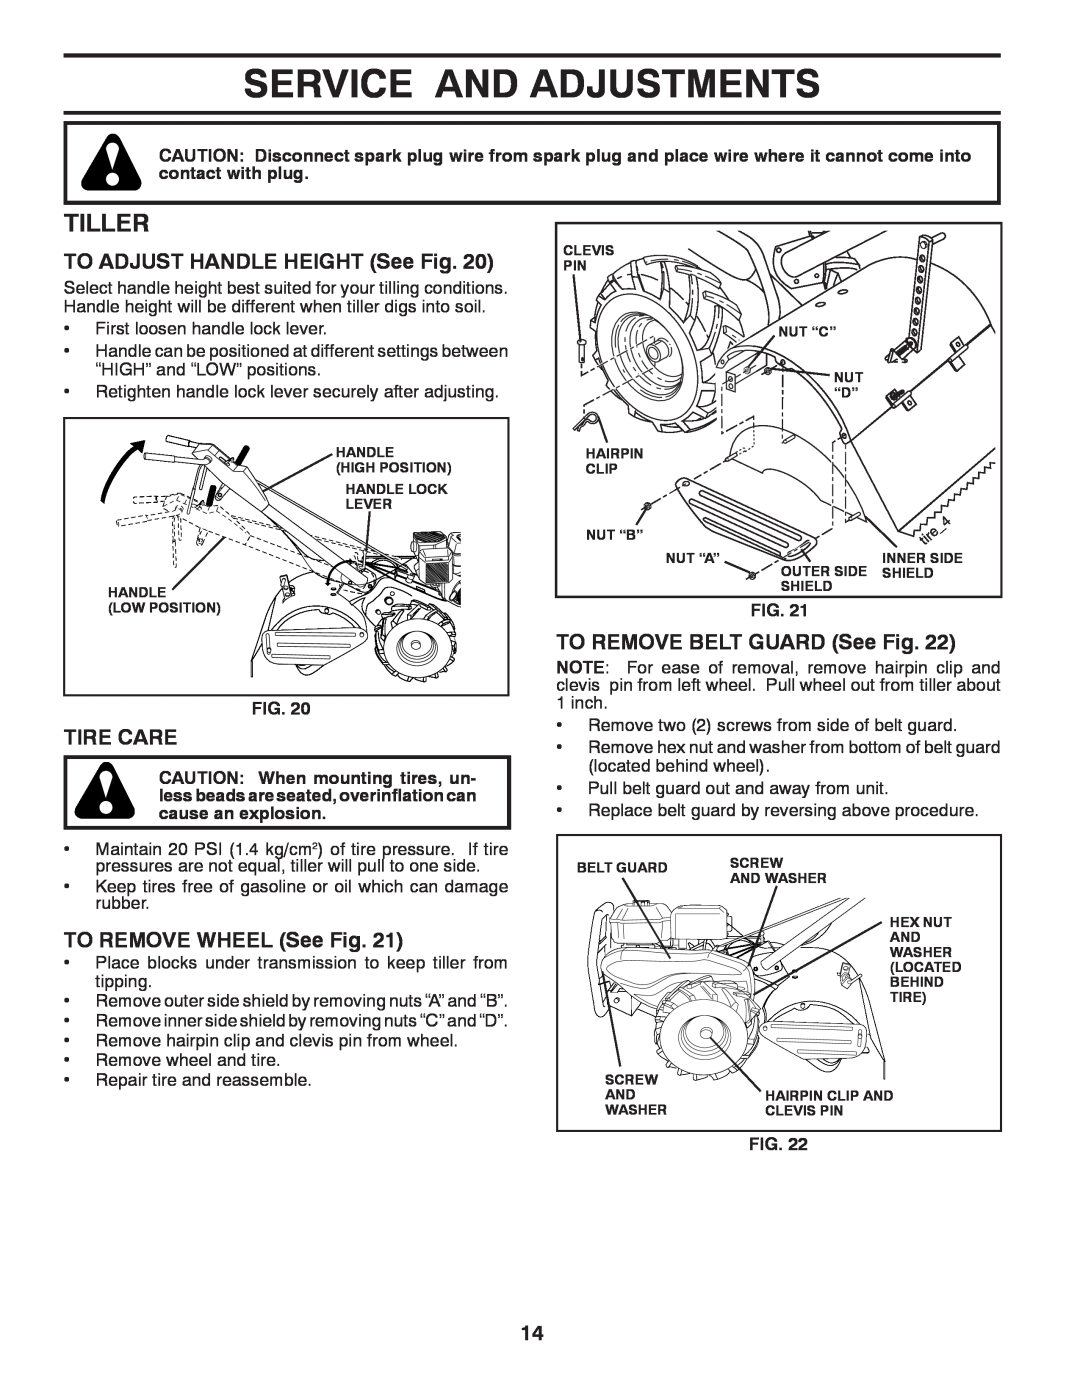 Poulan PRRT850 manual Service And Adjustments, Tiller, TO ADJUST HANDLE HEIGHT See Fig, Tire Care, TO REMOVE WHEEL See Fig 